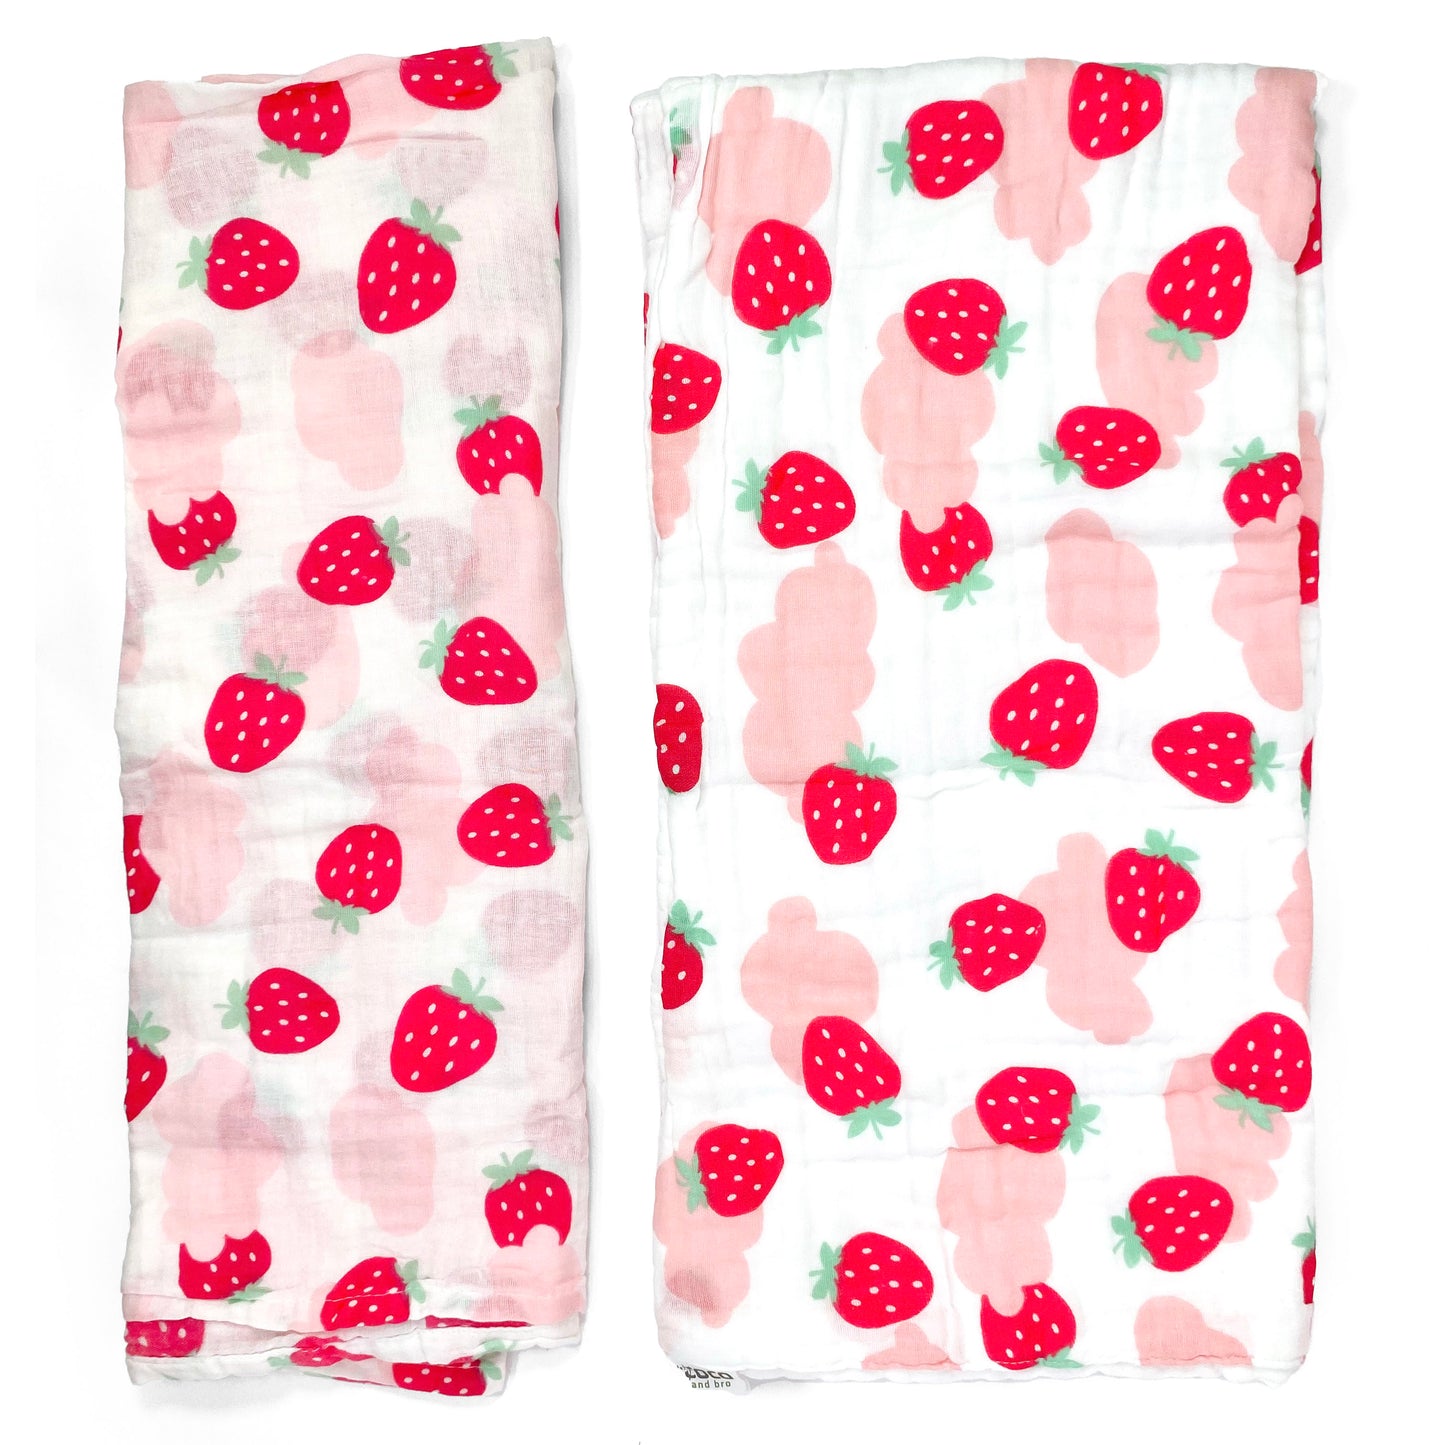 A set of two muslin baby blankets, one light swaddle blanket and one thick buggy blanket, with pink strawberry designs.